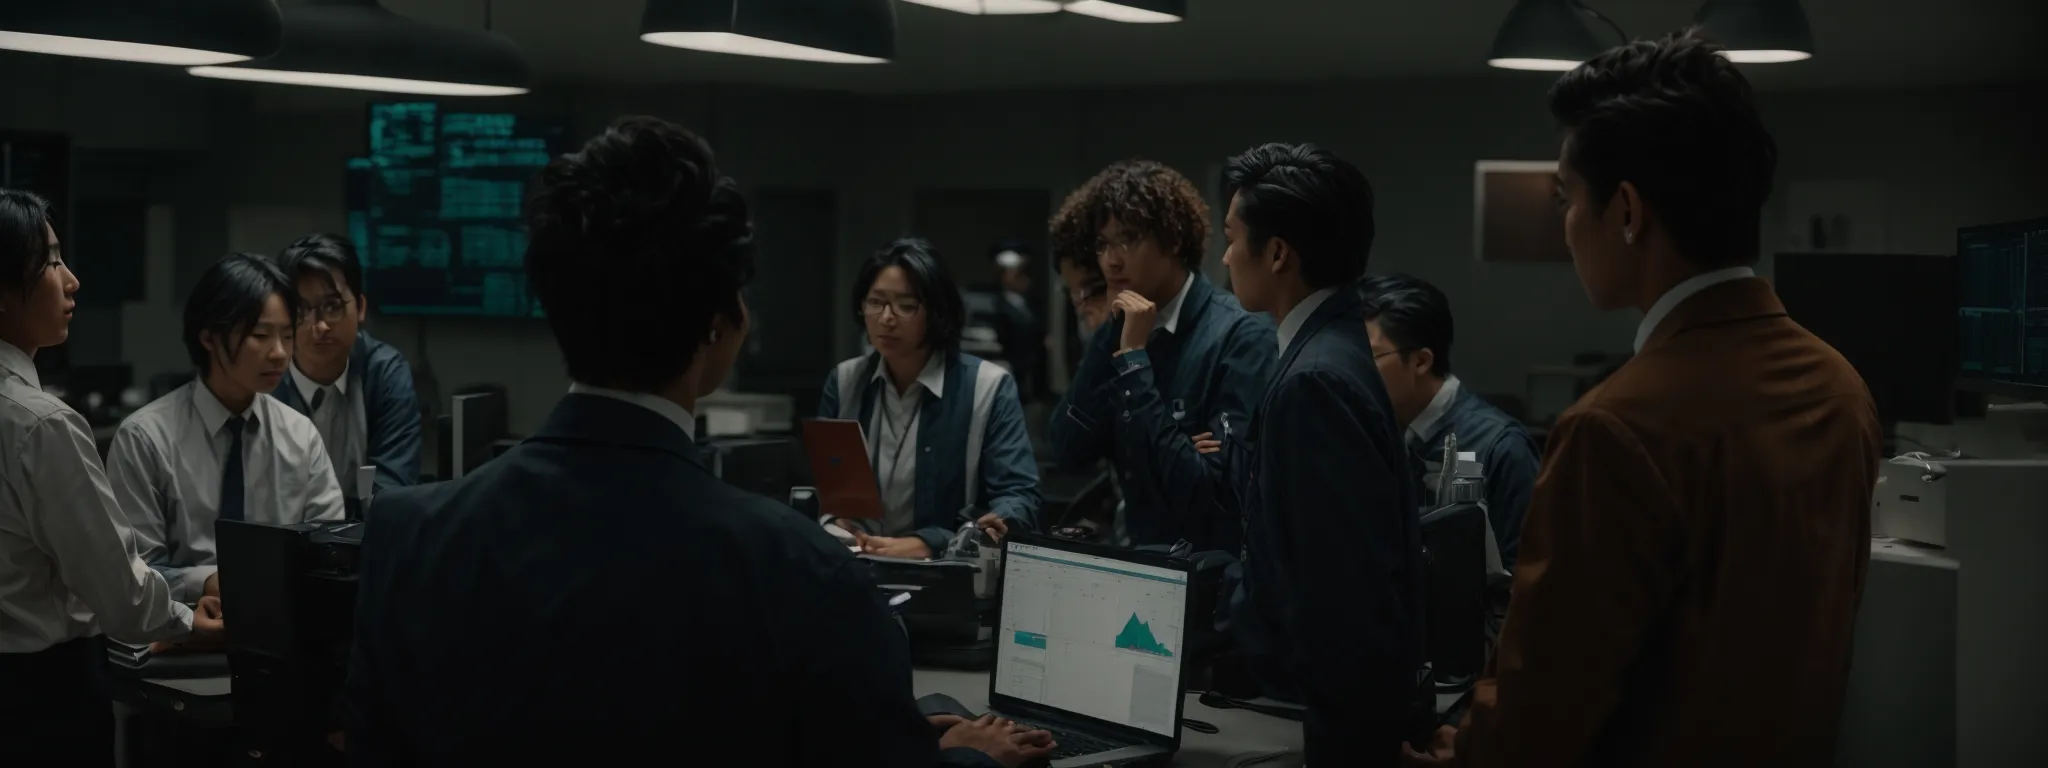 a team of professionals huddle around a computer, analyzing data and strategizing their next move.